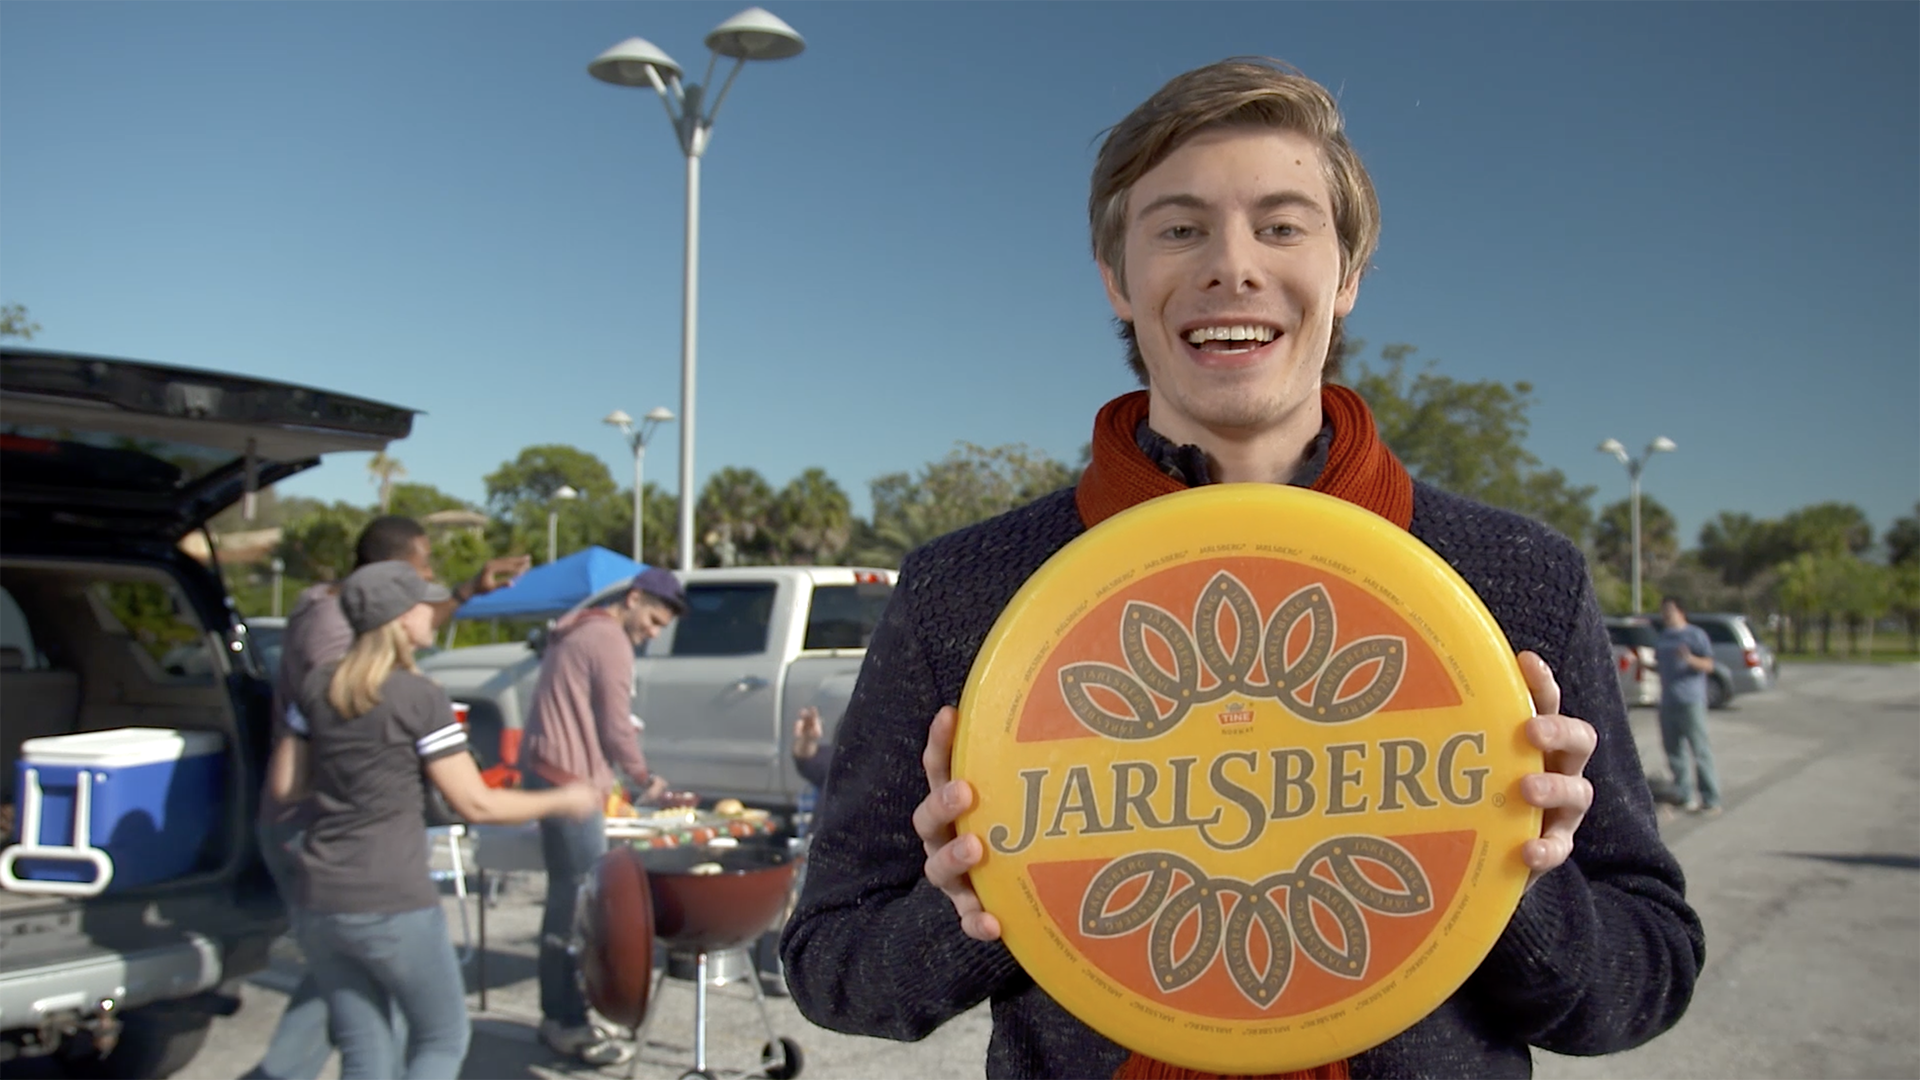 Man holding a Jarlsberg cheese wheel while people tailgate in the background